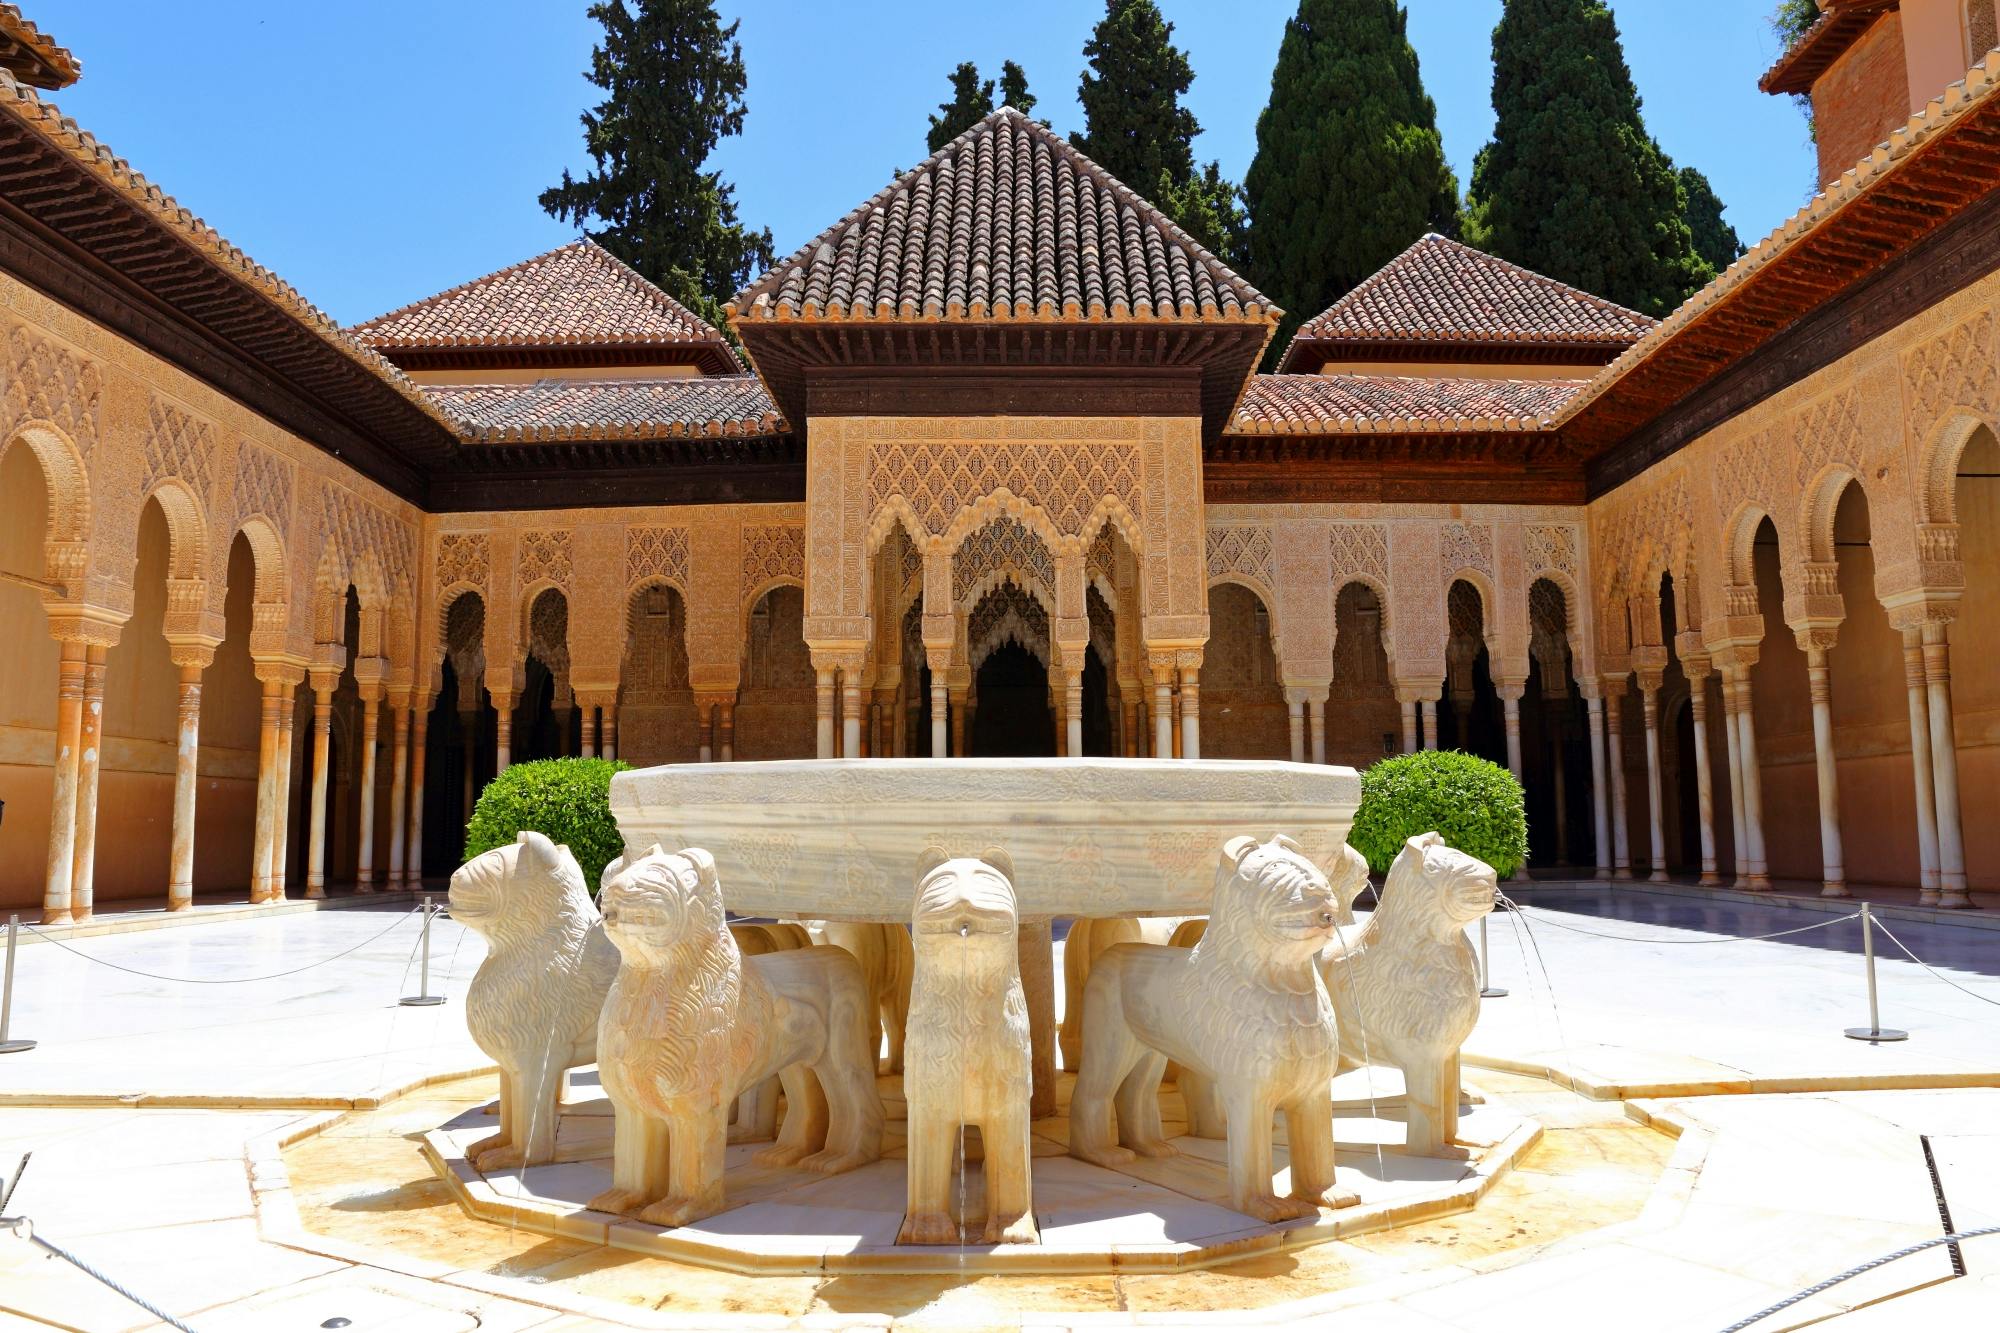 Alhambra plus Generalife skip-the-lines tickets and guided tour Musement